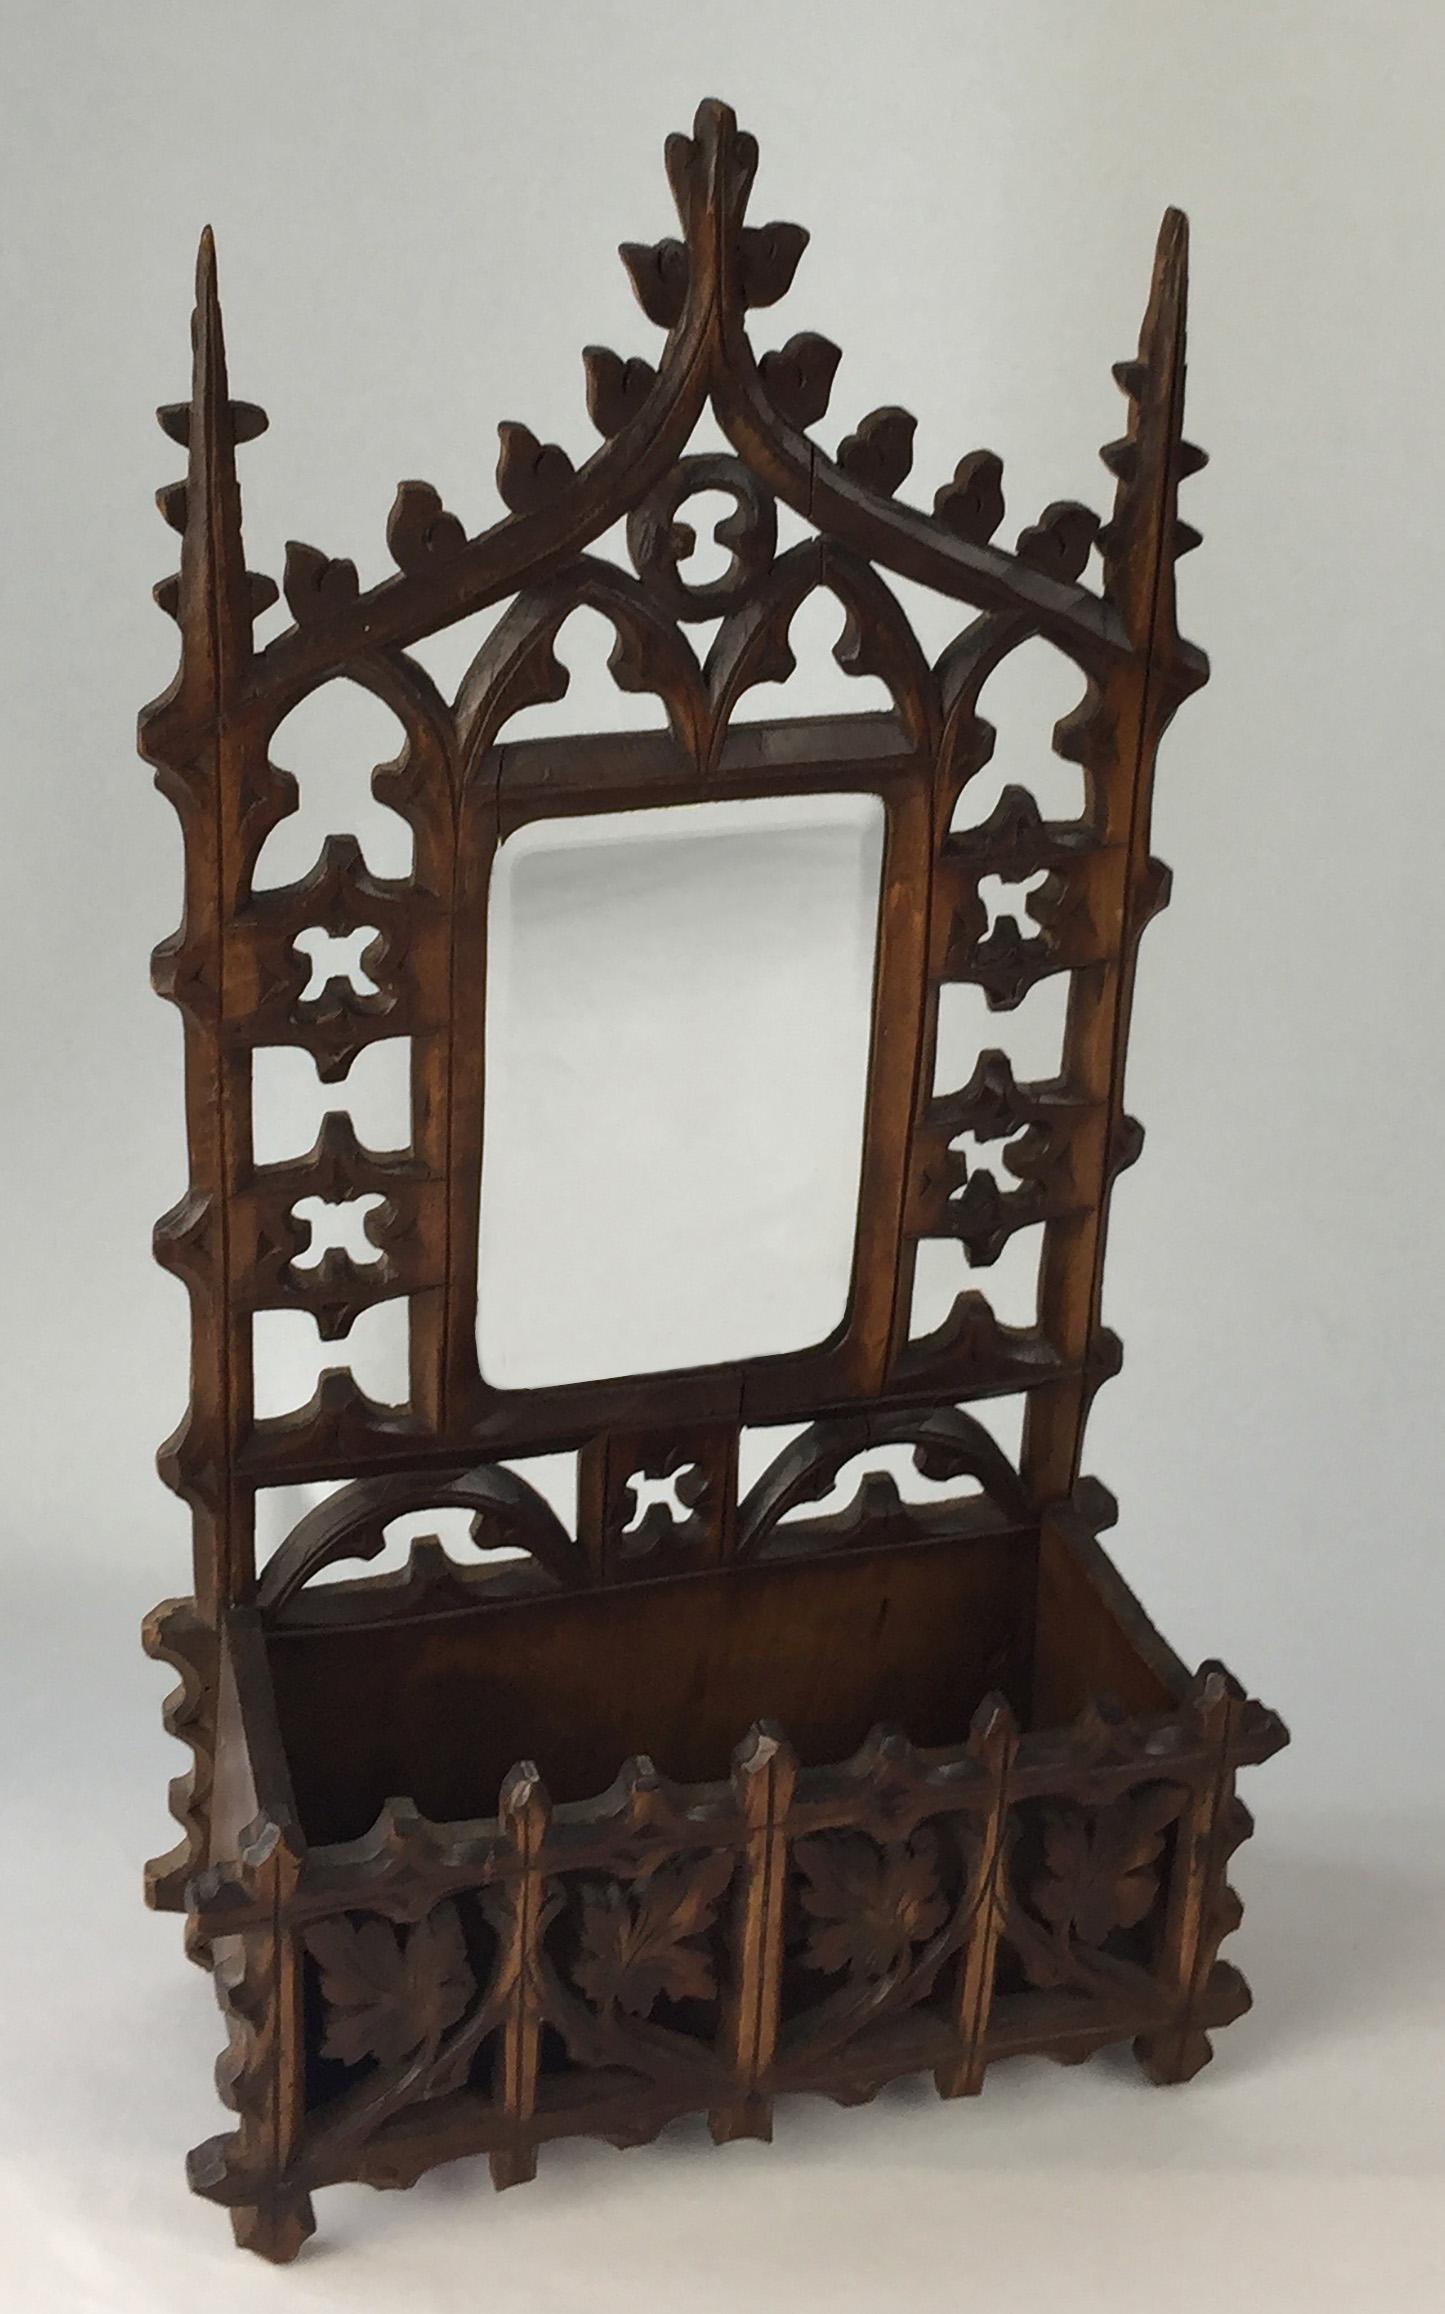 Carved wood fretwork letter rack with small box and bevelled curved cornered mirror. Could be storage for car keys or letters. Some damage. The wood could be lime wood as the carving is delicate.